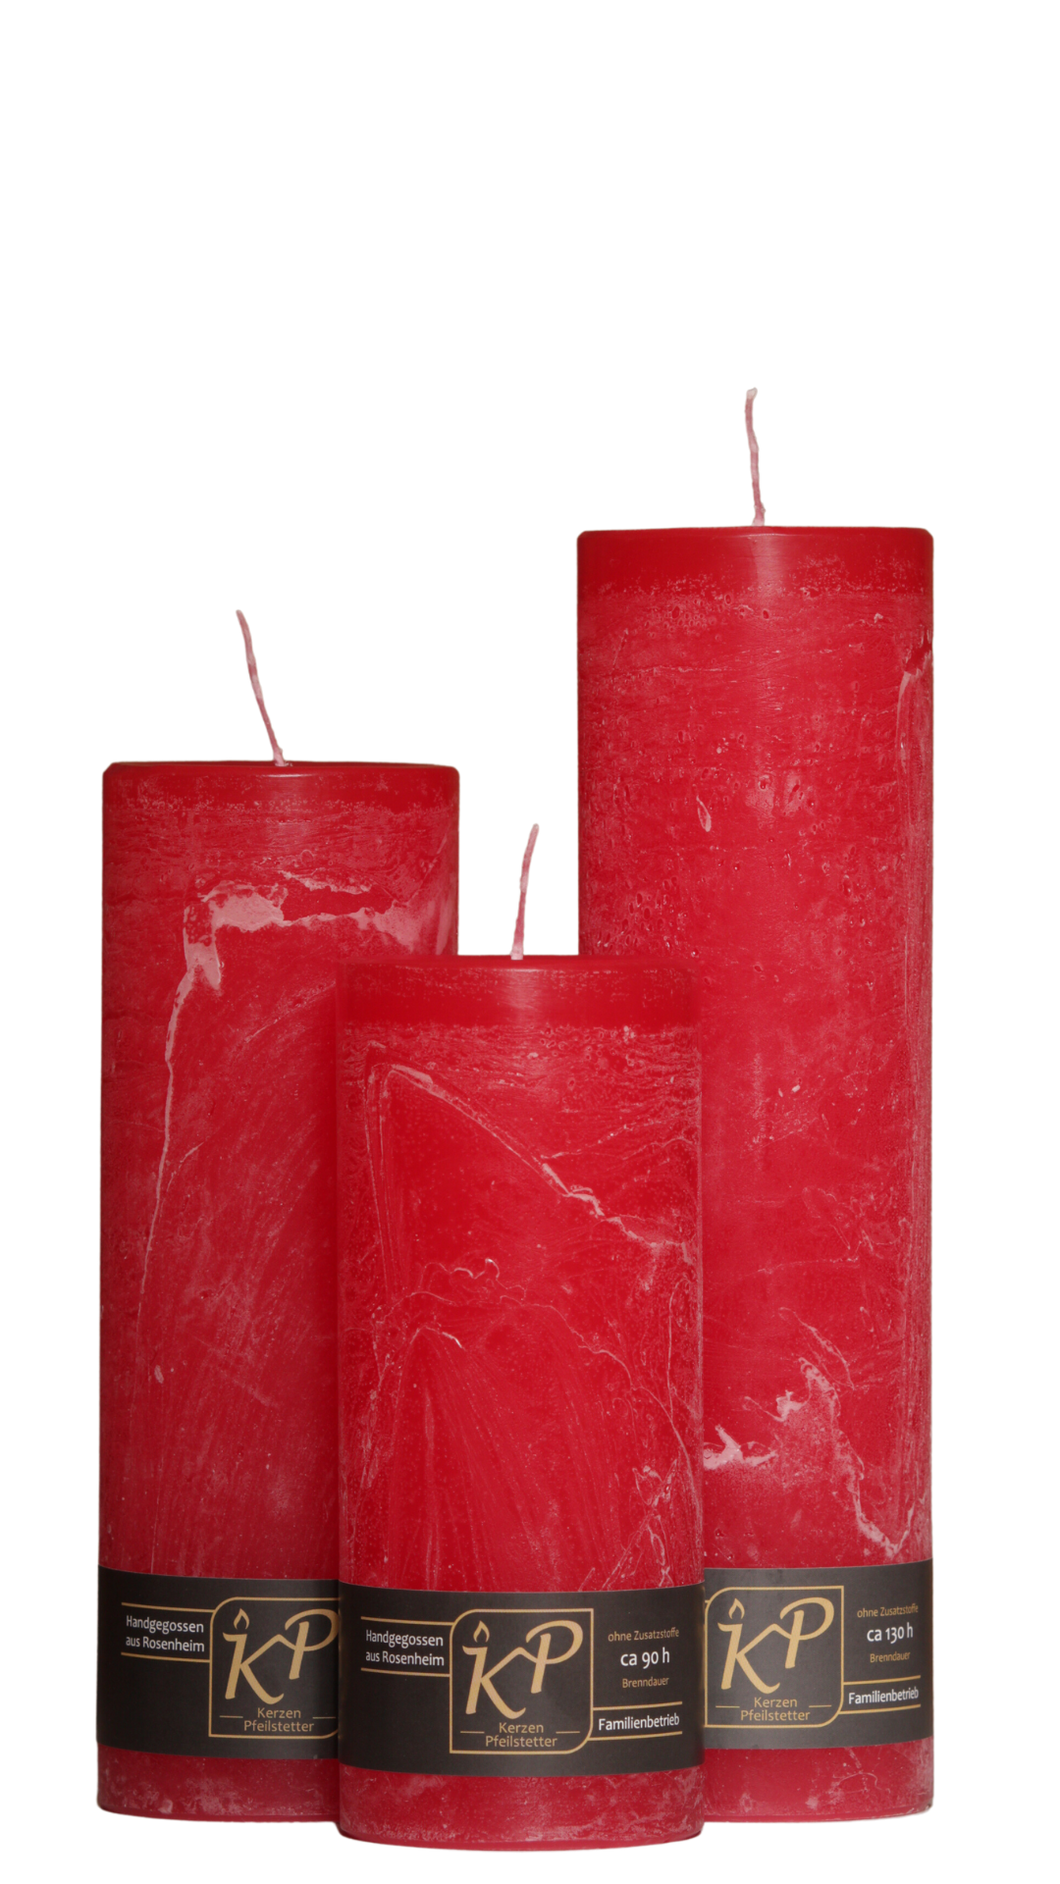 Dalina flower candle | summer red | ~ 130h burning time